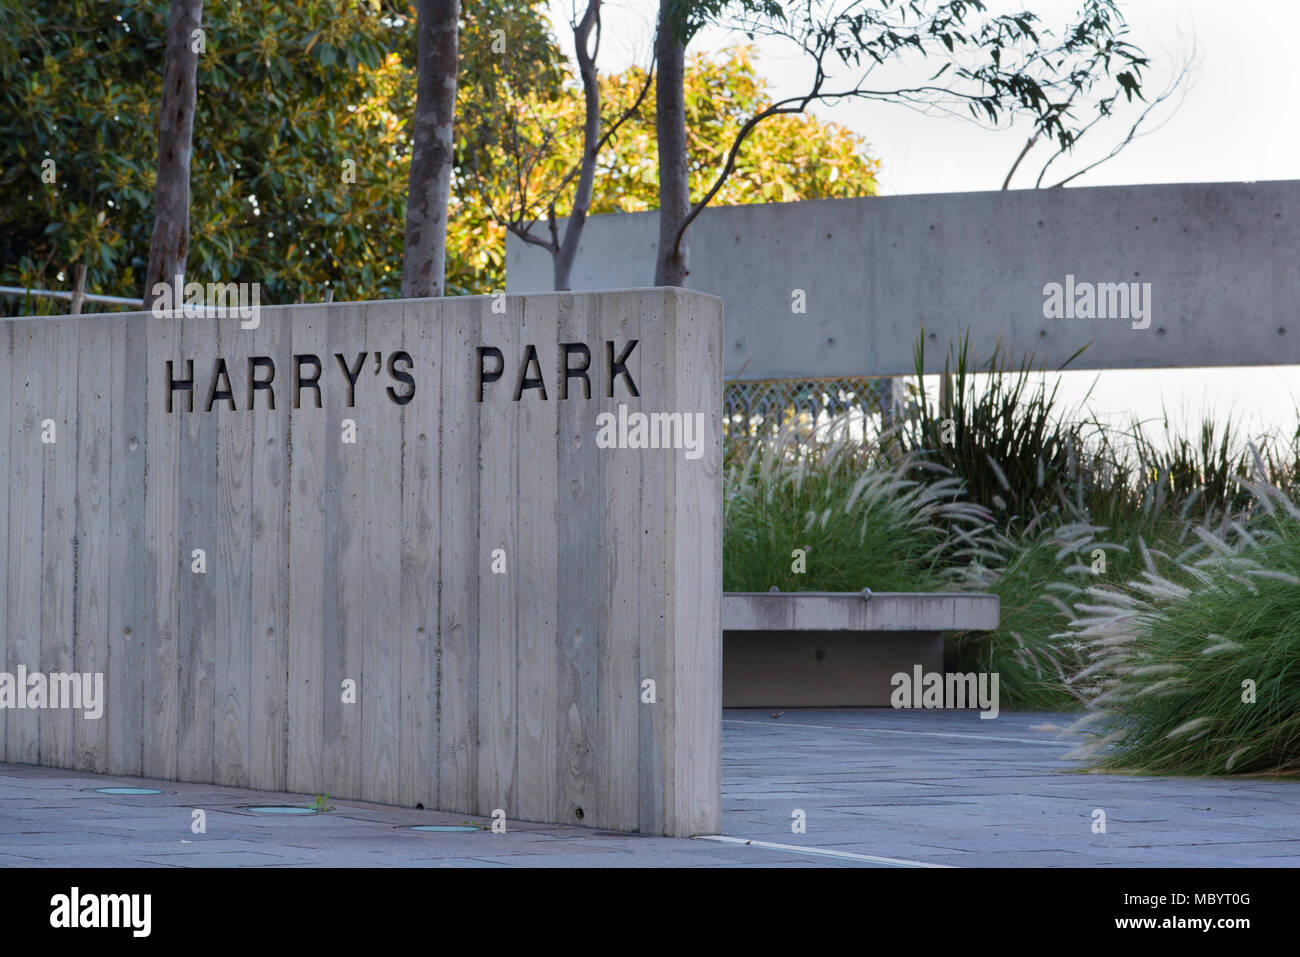 Harry's Park is a small urban park designed in memory of Harry Seidler by John Curro and gifted to the city by his wife Penelope Seidler Stock Photo